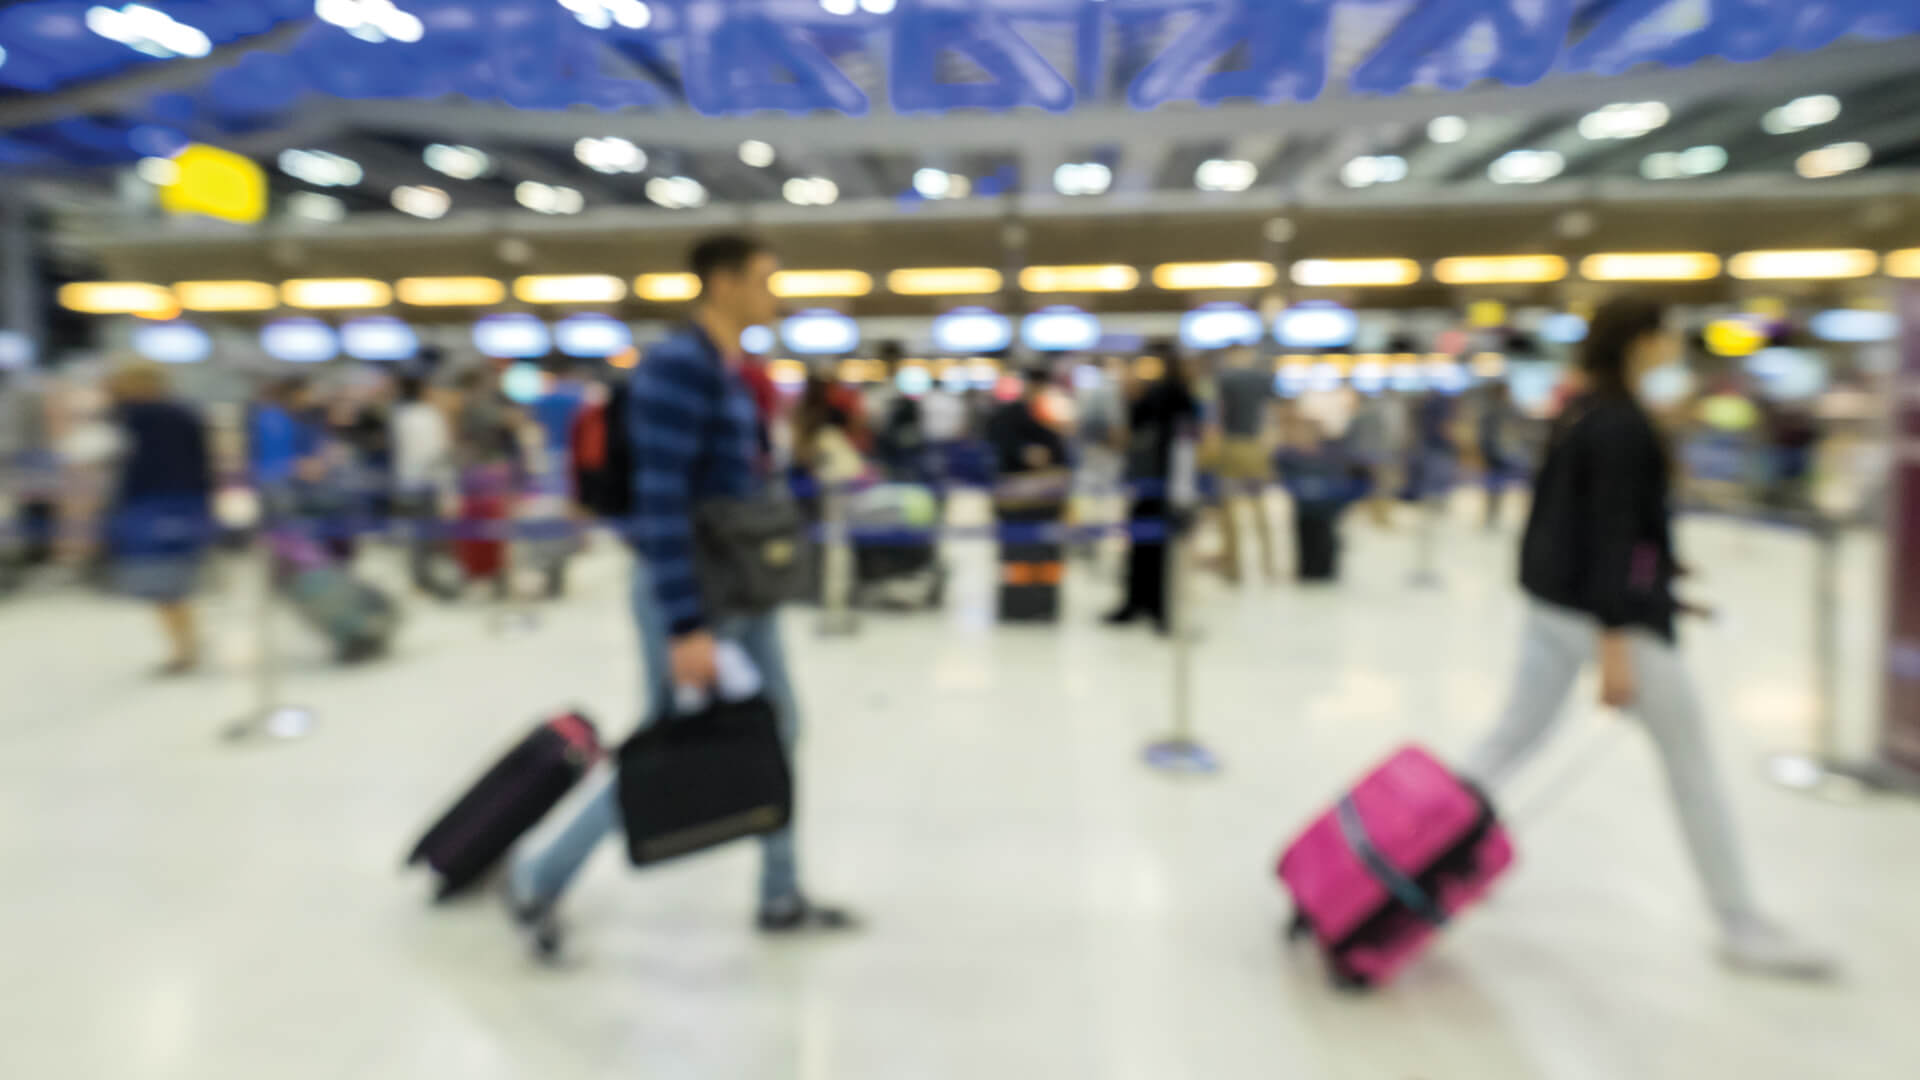 A defocused image of passengers with luggage in a busy airport terminal, capturing the hustle of travel.